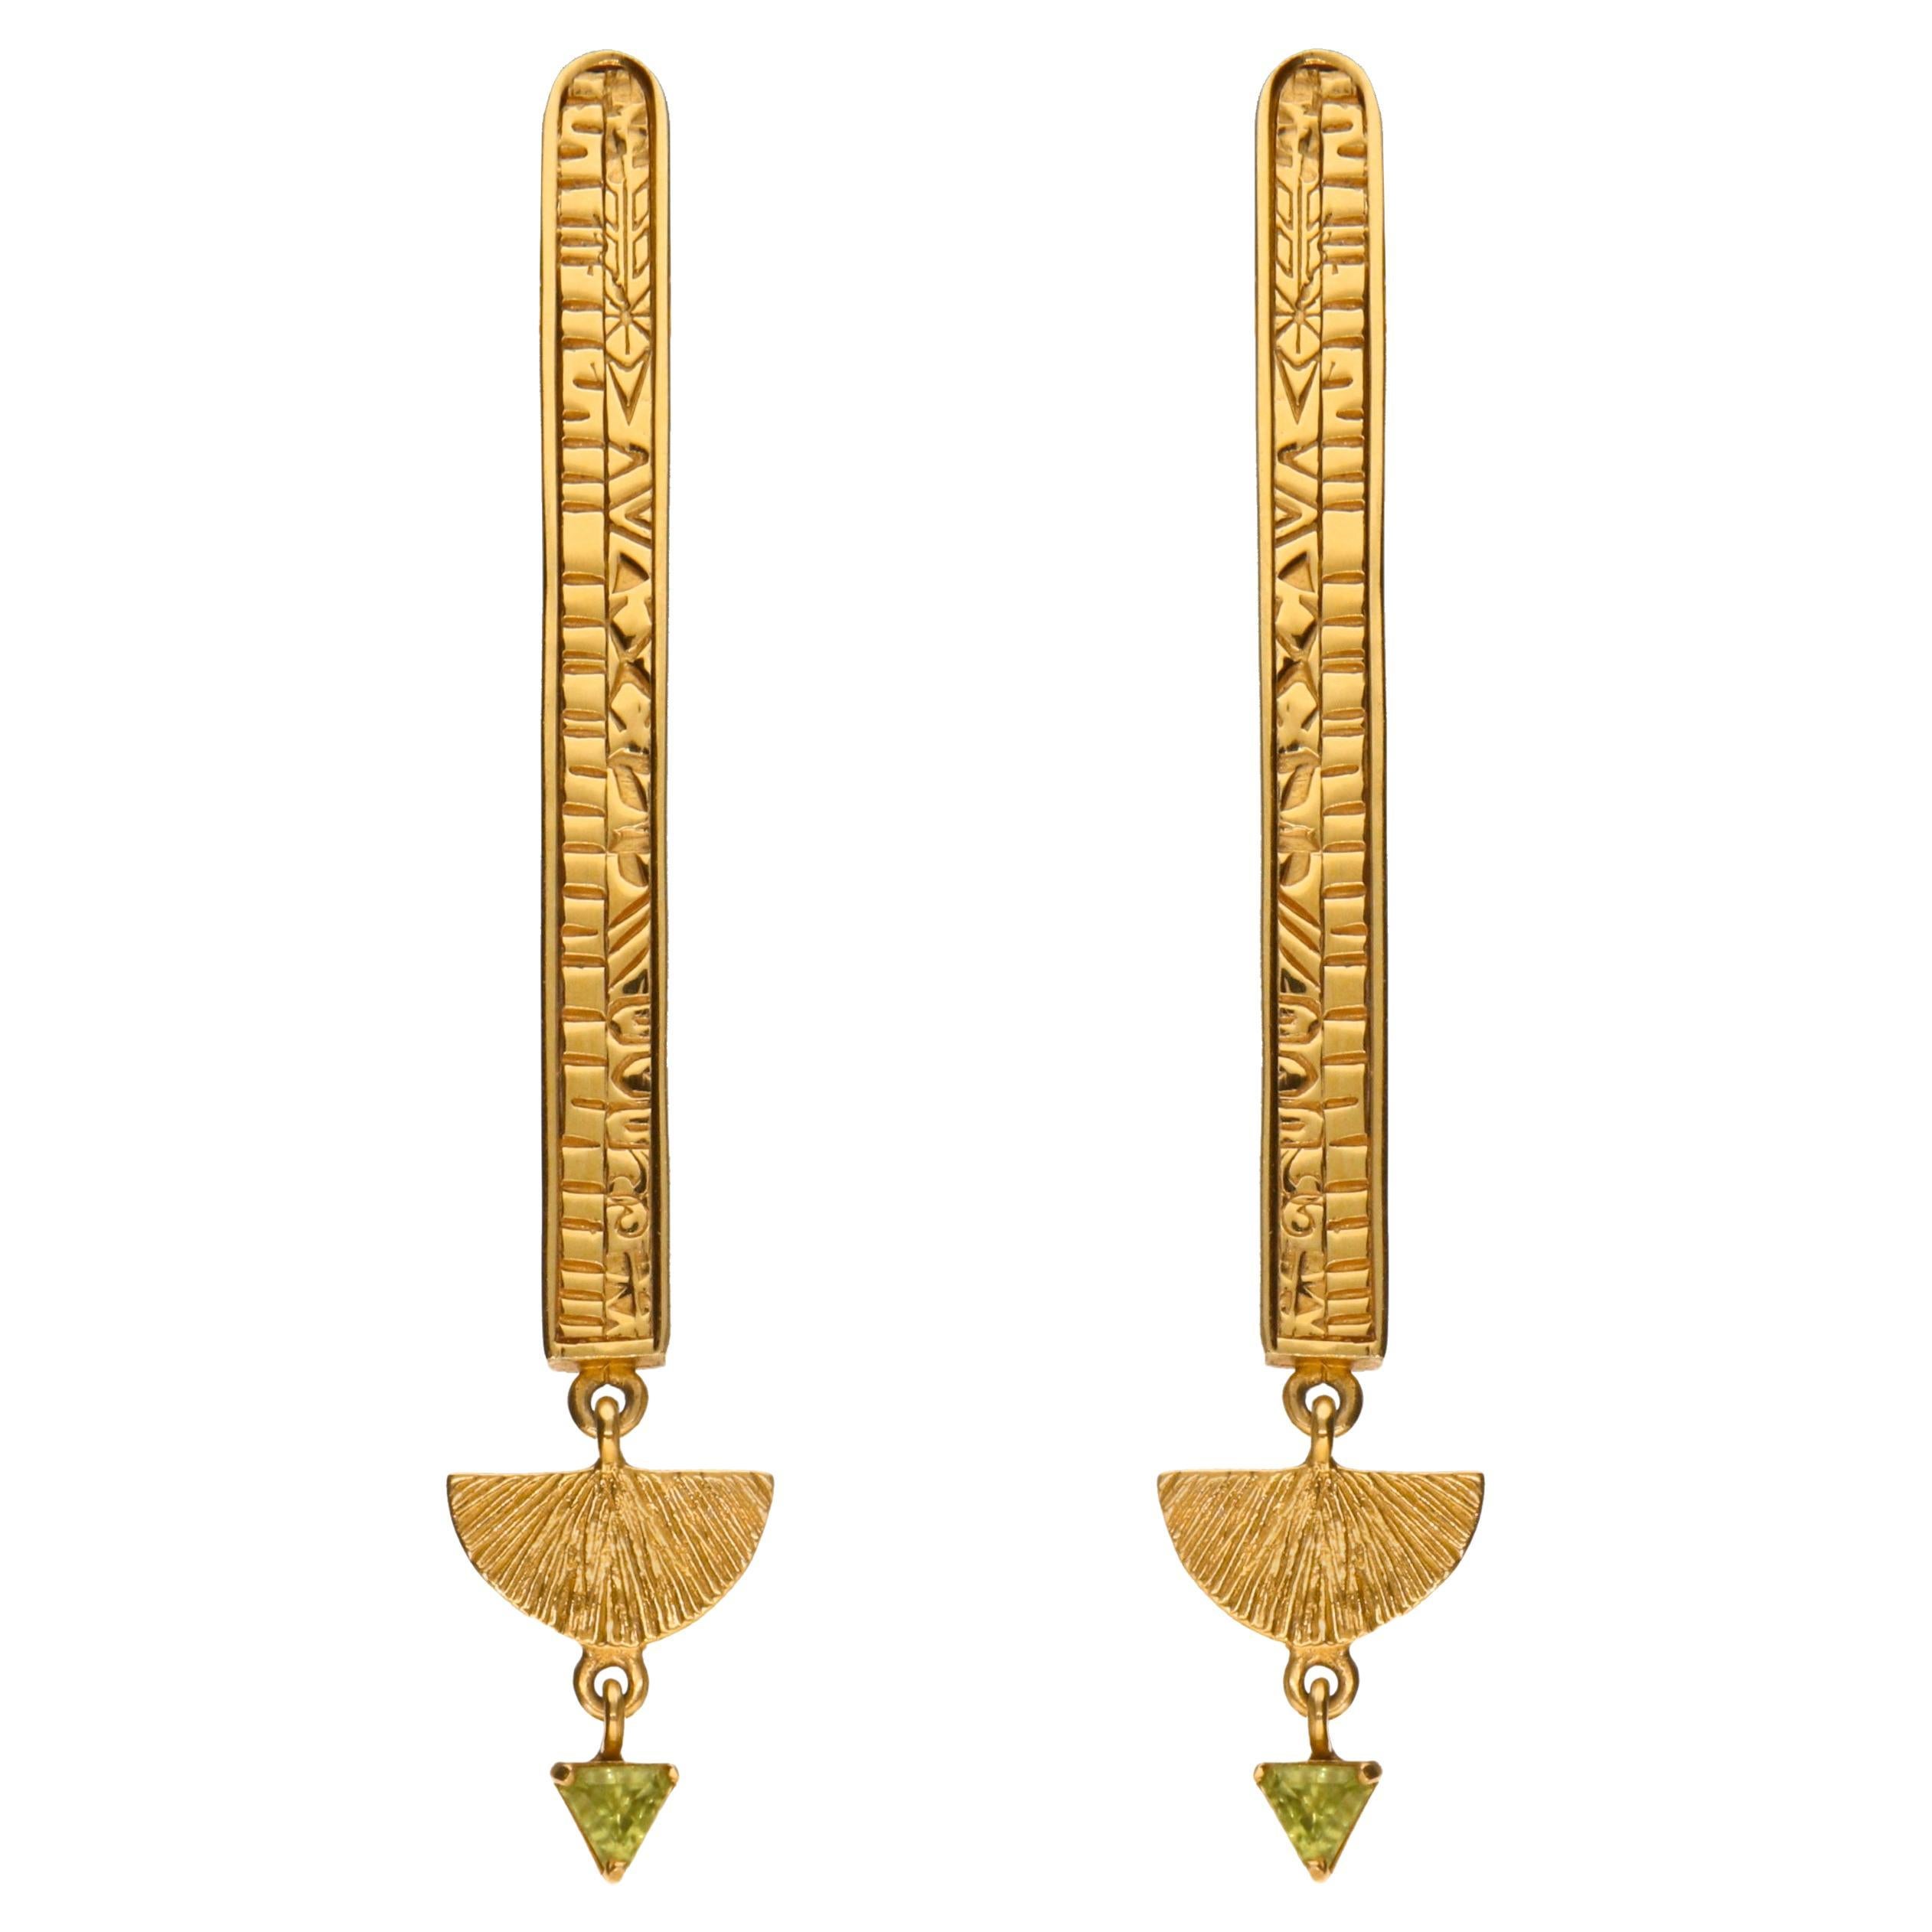 Cleo Earrings in 14k Yellow Gold: an Ode to Ancient Egypt